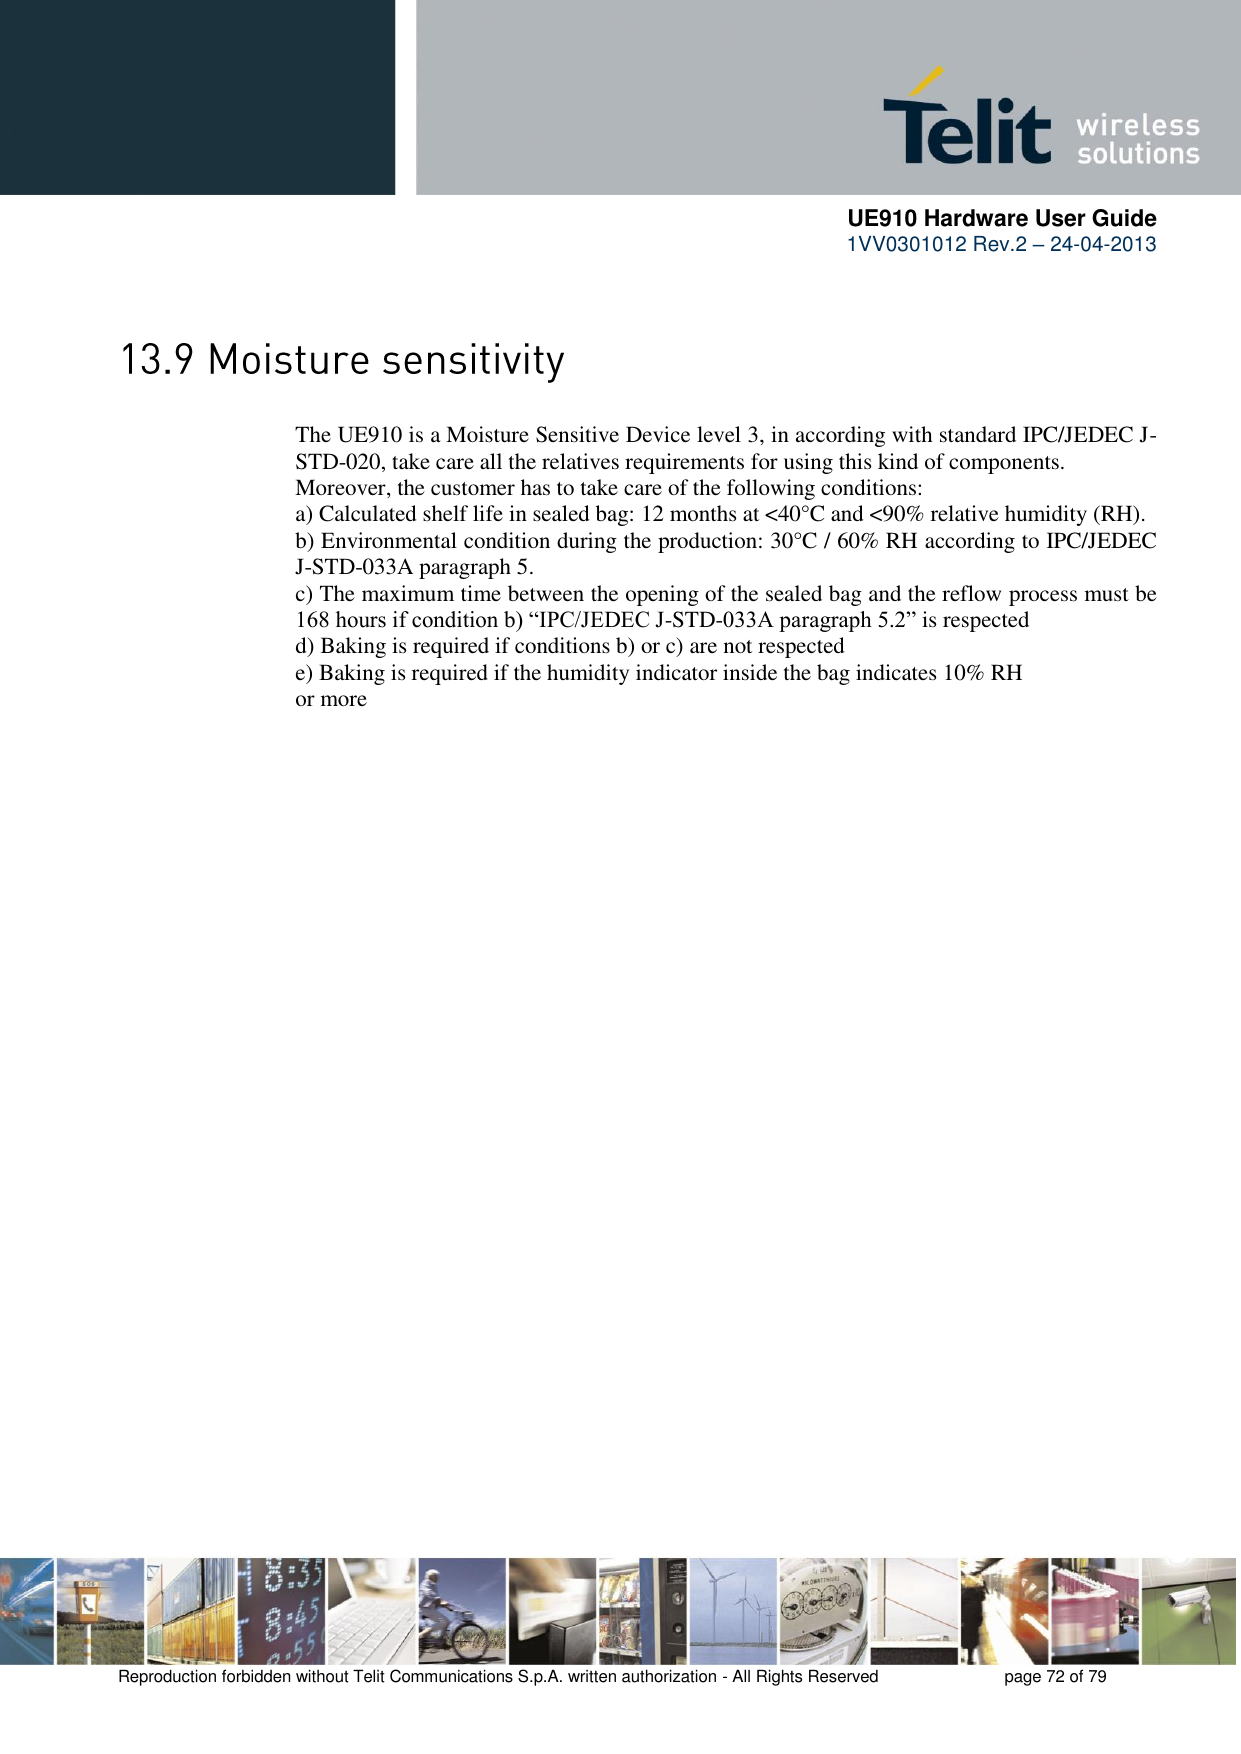      UE910 Hardware User Guide  1VV0301012 Rev.2 – 24-04-2013    Reproduction forbidden without Telit Communications S.p.A. written authorization - All Rights Reserved    page 72 of 79    The UE910 is a Moisture Sensitive Device level 3, in according with standard IPC/JEDEC J-STD-020, take care all the relatives requirements for using this kind of components. Moreover, the customer has to take care of the following conditions: a) Calculated shelf life in sealed bag: 12 months at &lt;40°C and &lt;90% relative humidity (RH). b) Environmental condition during the production: 30°C / 60% RH according to IPC/JEDEC J-STD-033A paragraph 5. c) The maximum time between the opening of the sealed bag and the reflow process must be 168 hours if condition b) “IPC/JEDEC J-STD-033A paragraph 5.2” is respected d) Baking is required if conditions b) or c) are not respected e) Baking is required if the humidity indicator inside the bag indicates 10% RH or more 